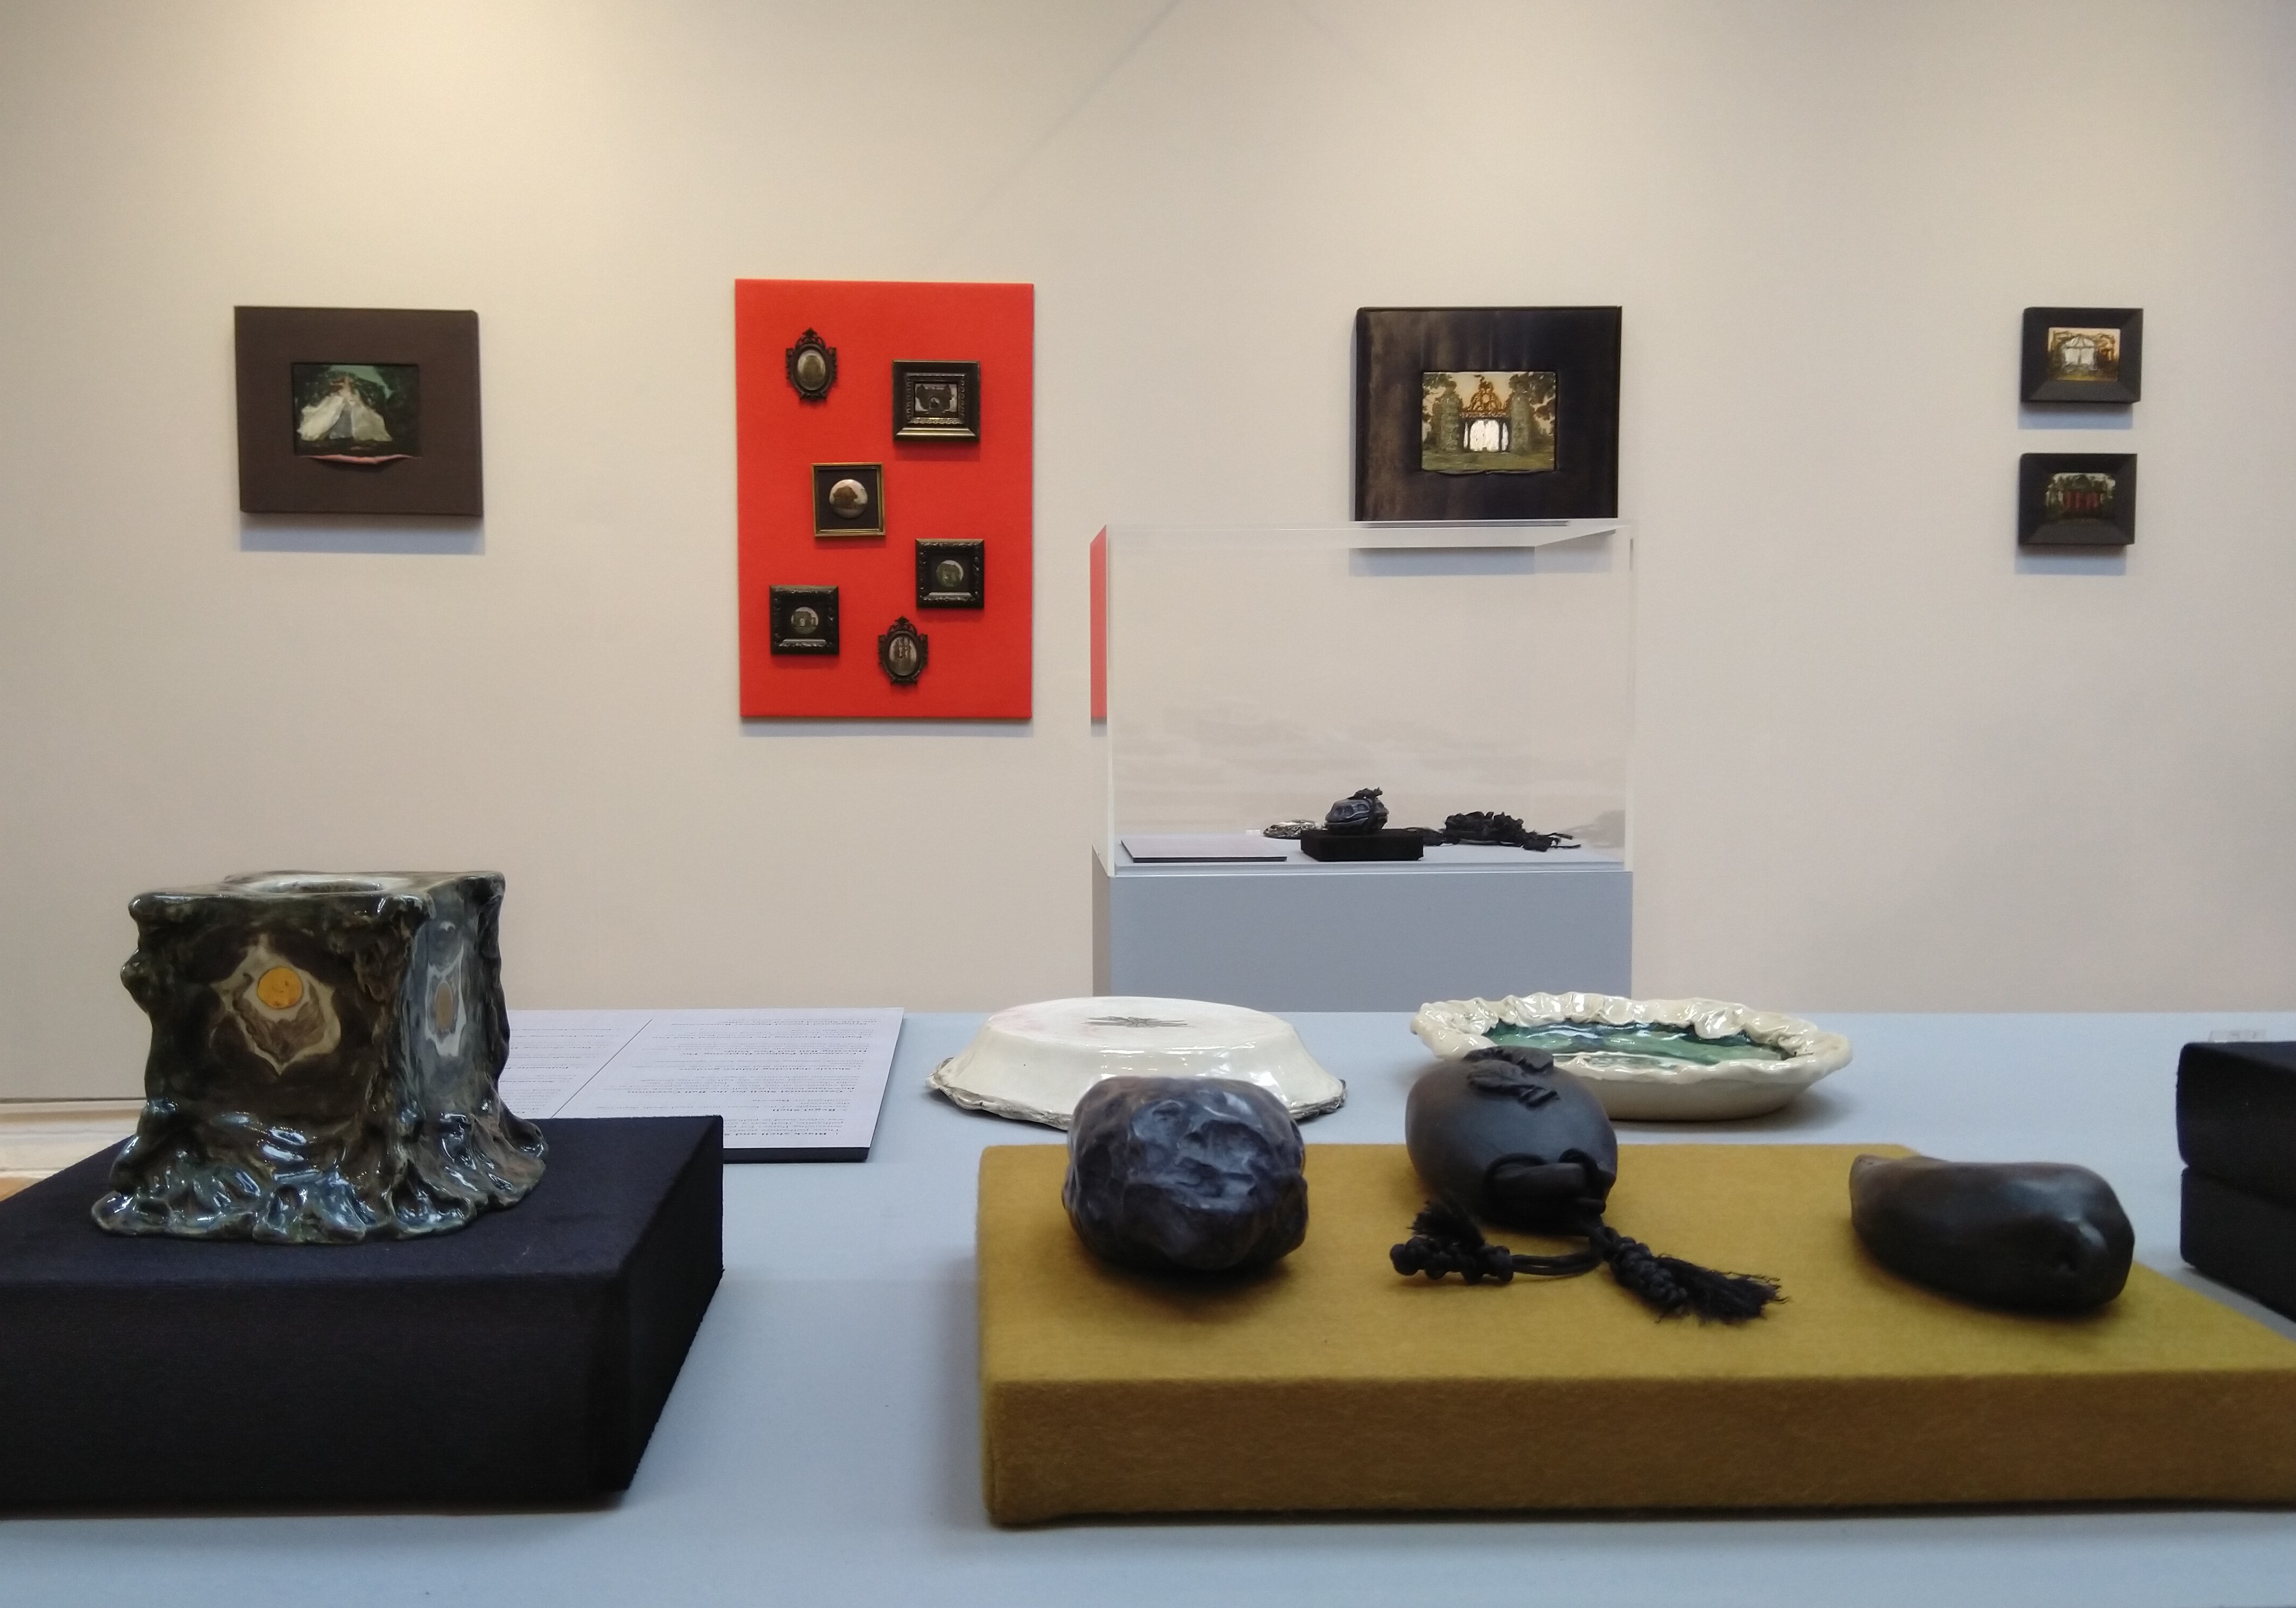 Inside the exhibition, showing a table with six ceramic objects, a glass cabinet and five paintings on the wall.